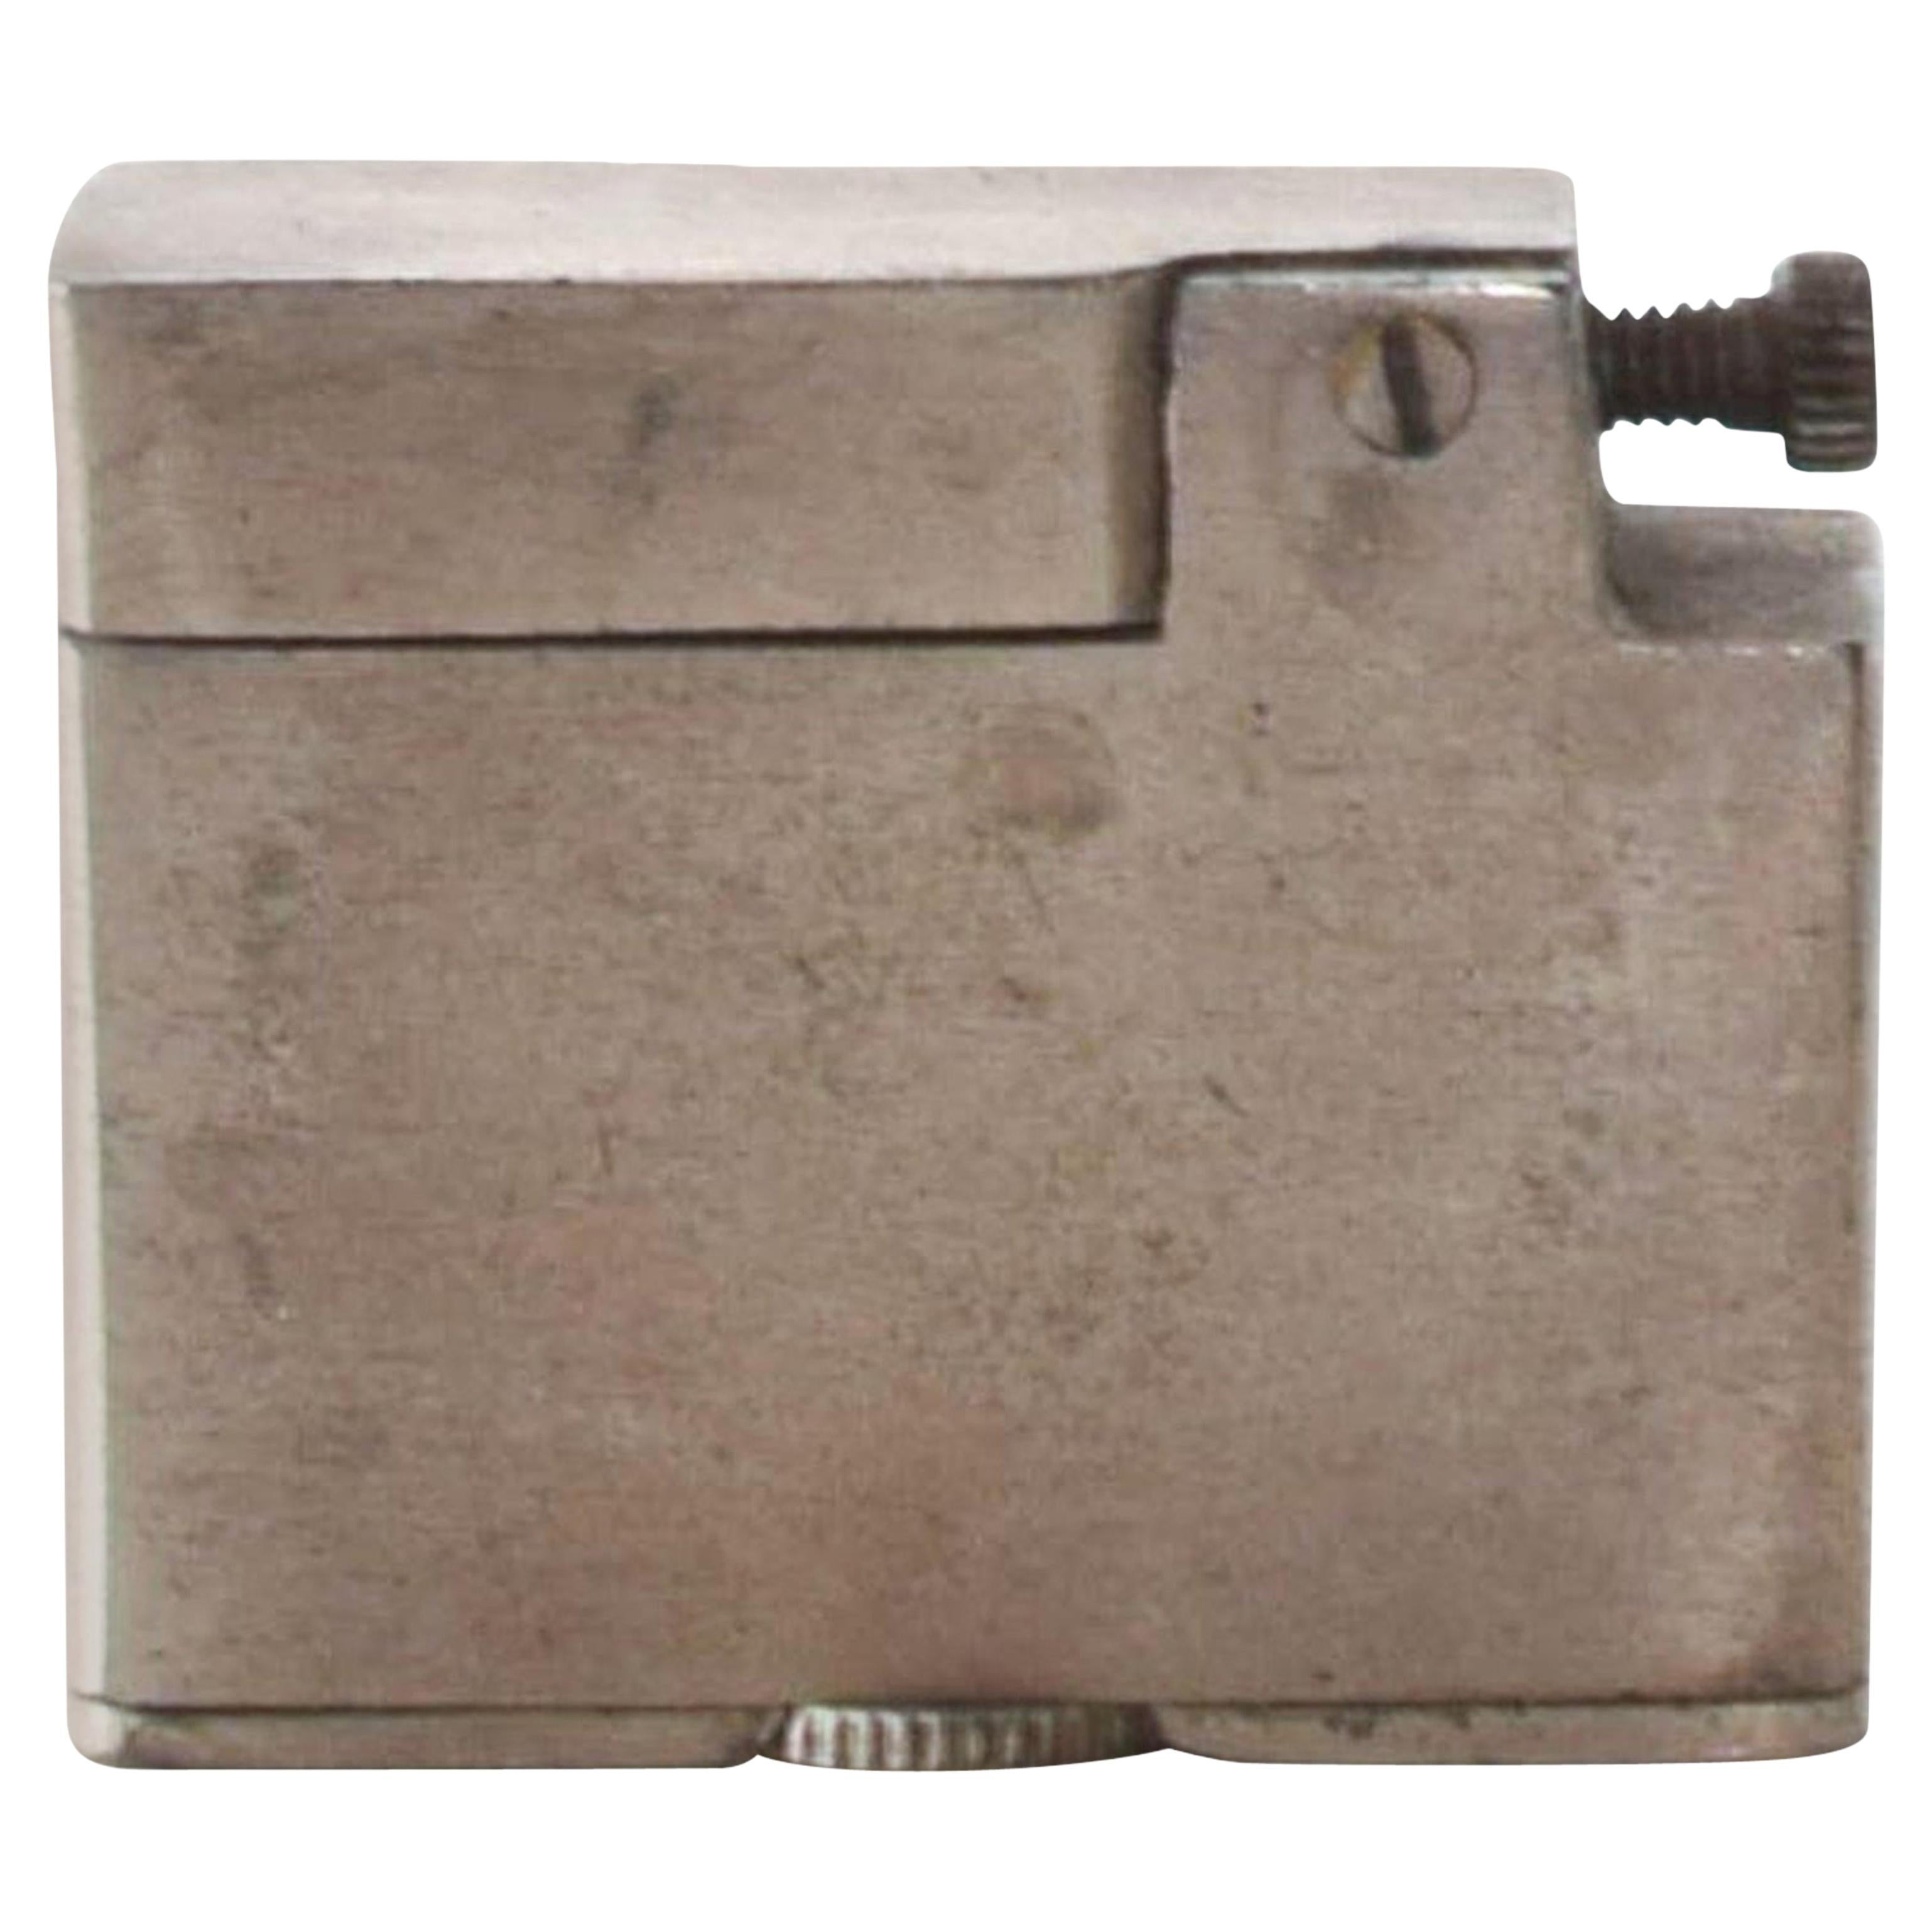 AMBIANIC presents
Silver plated Cigarette Lighter Vintage Midcentury Mod 1960s
Dimensions: 1.5 x .5 x 1.25
Original unrestored vintage preowned condition. Item has not been serviced. 
Refer to images provided.

